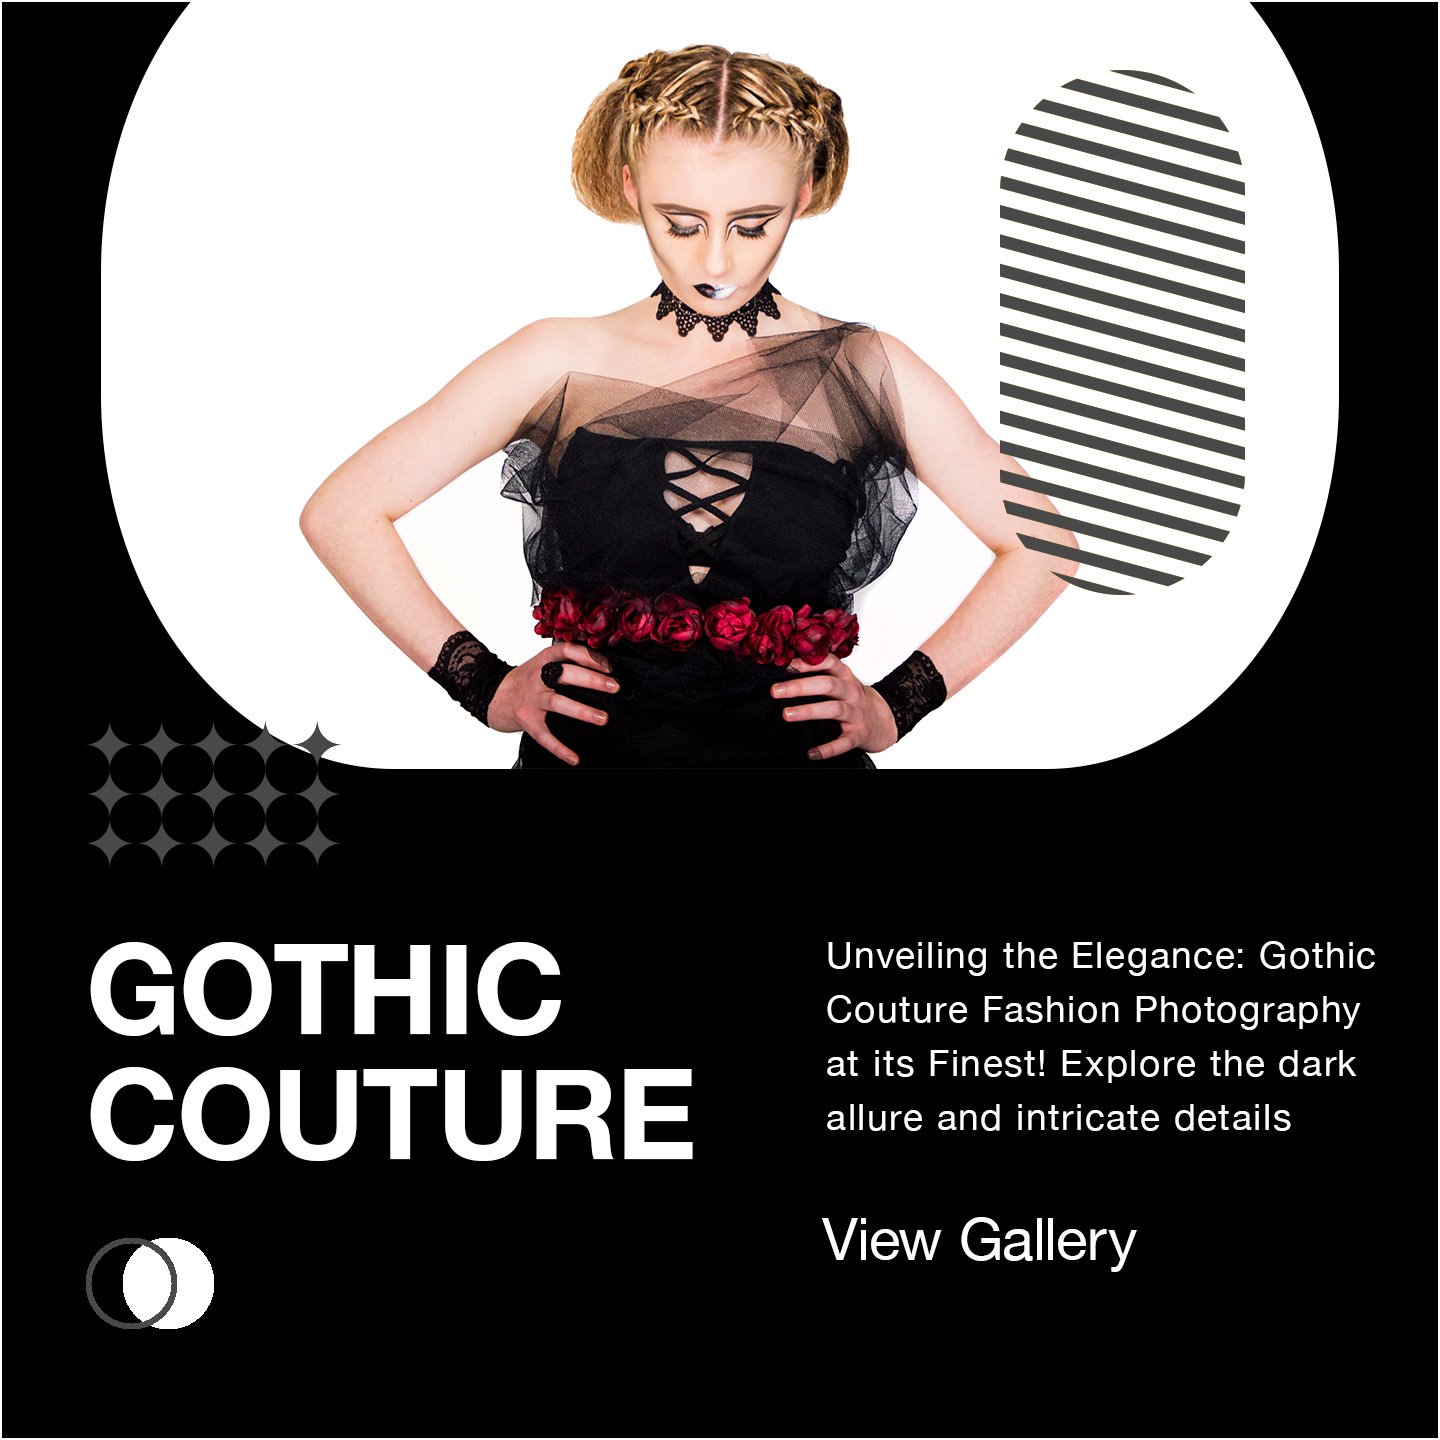 Gothic Couture Photoshoot